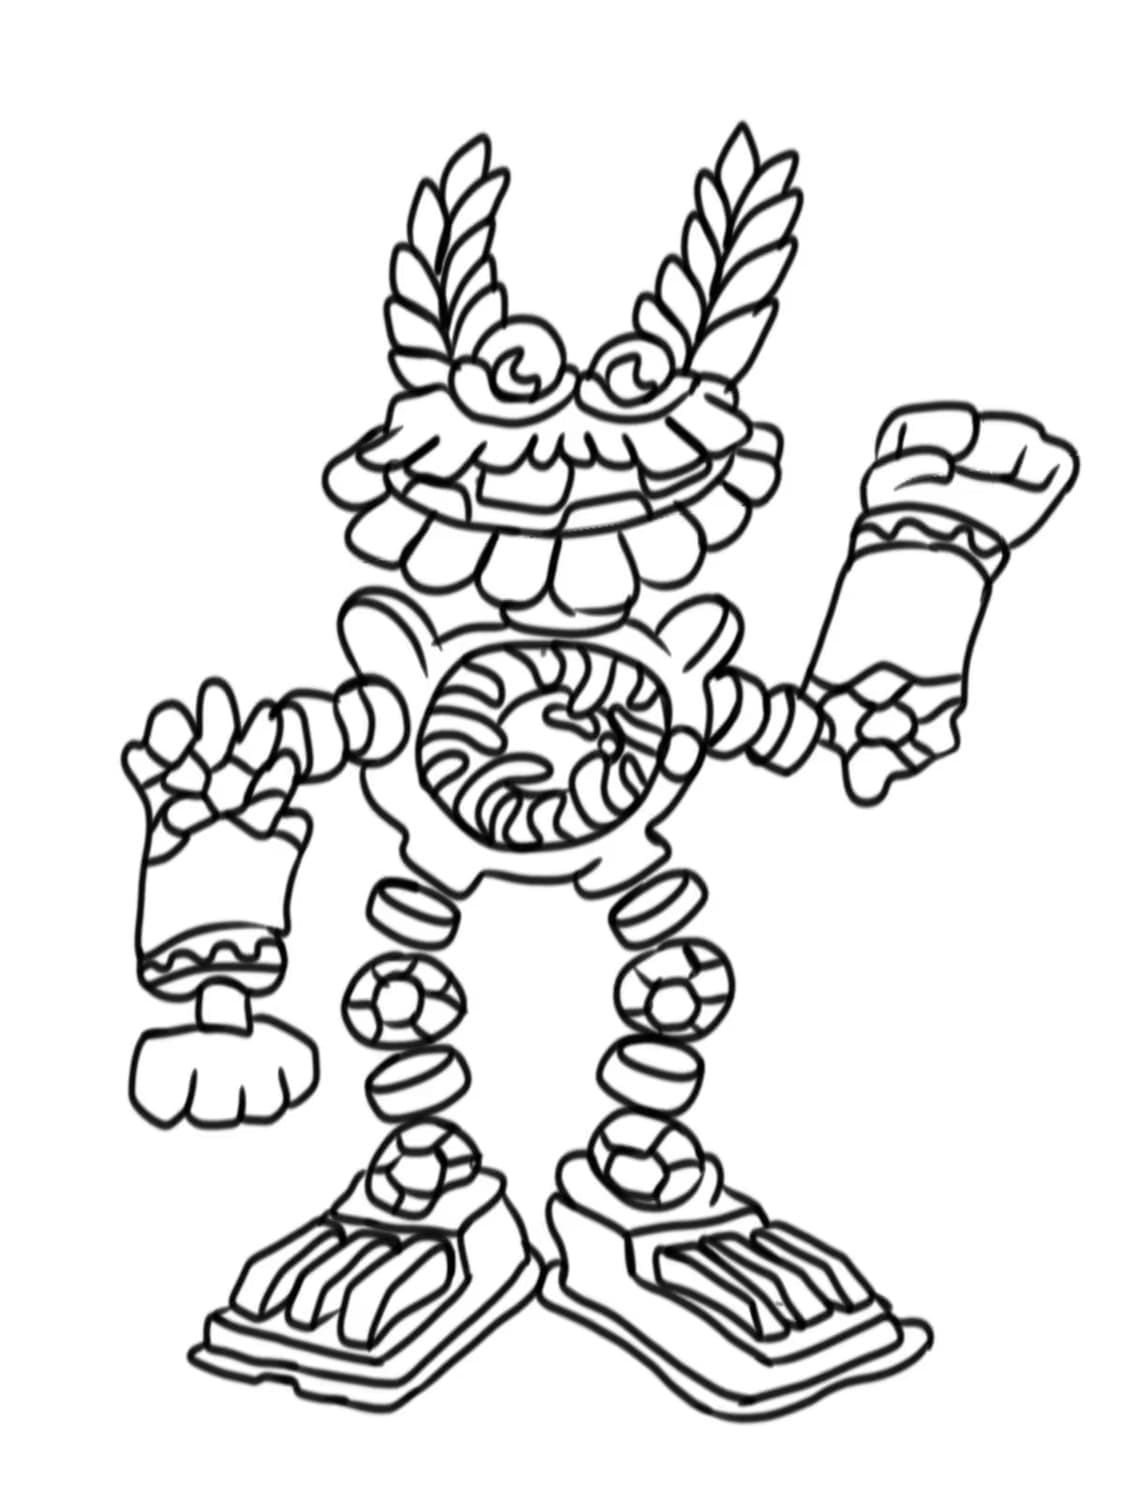 Free Wubbox coloring page - Download, Print or Color Online for Free